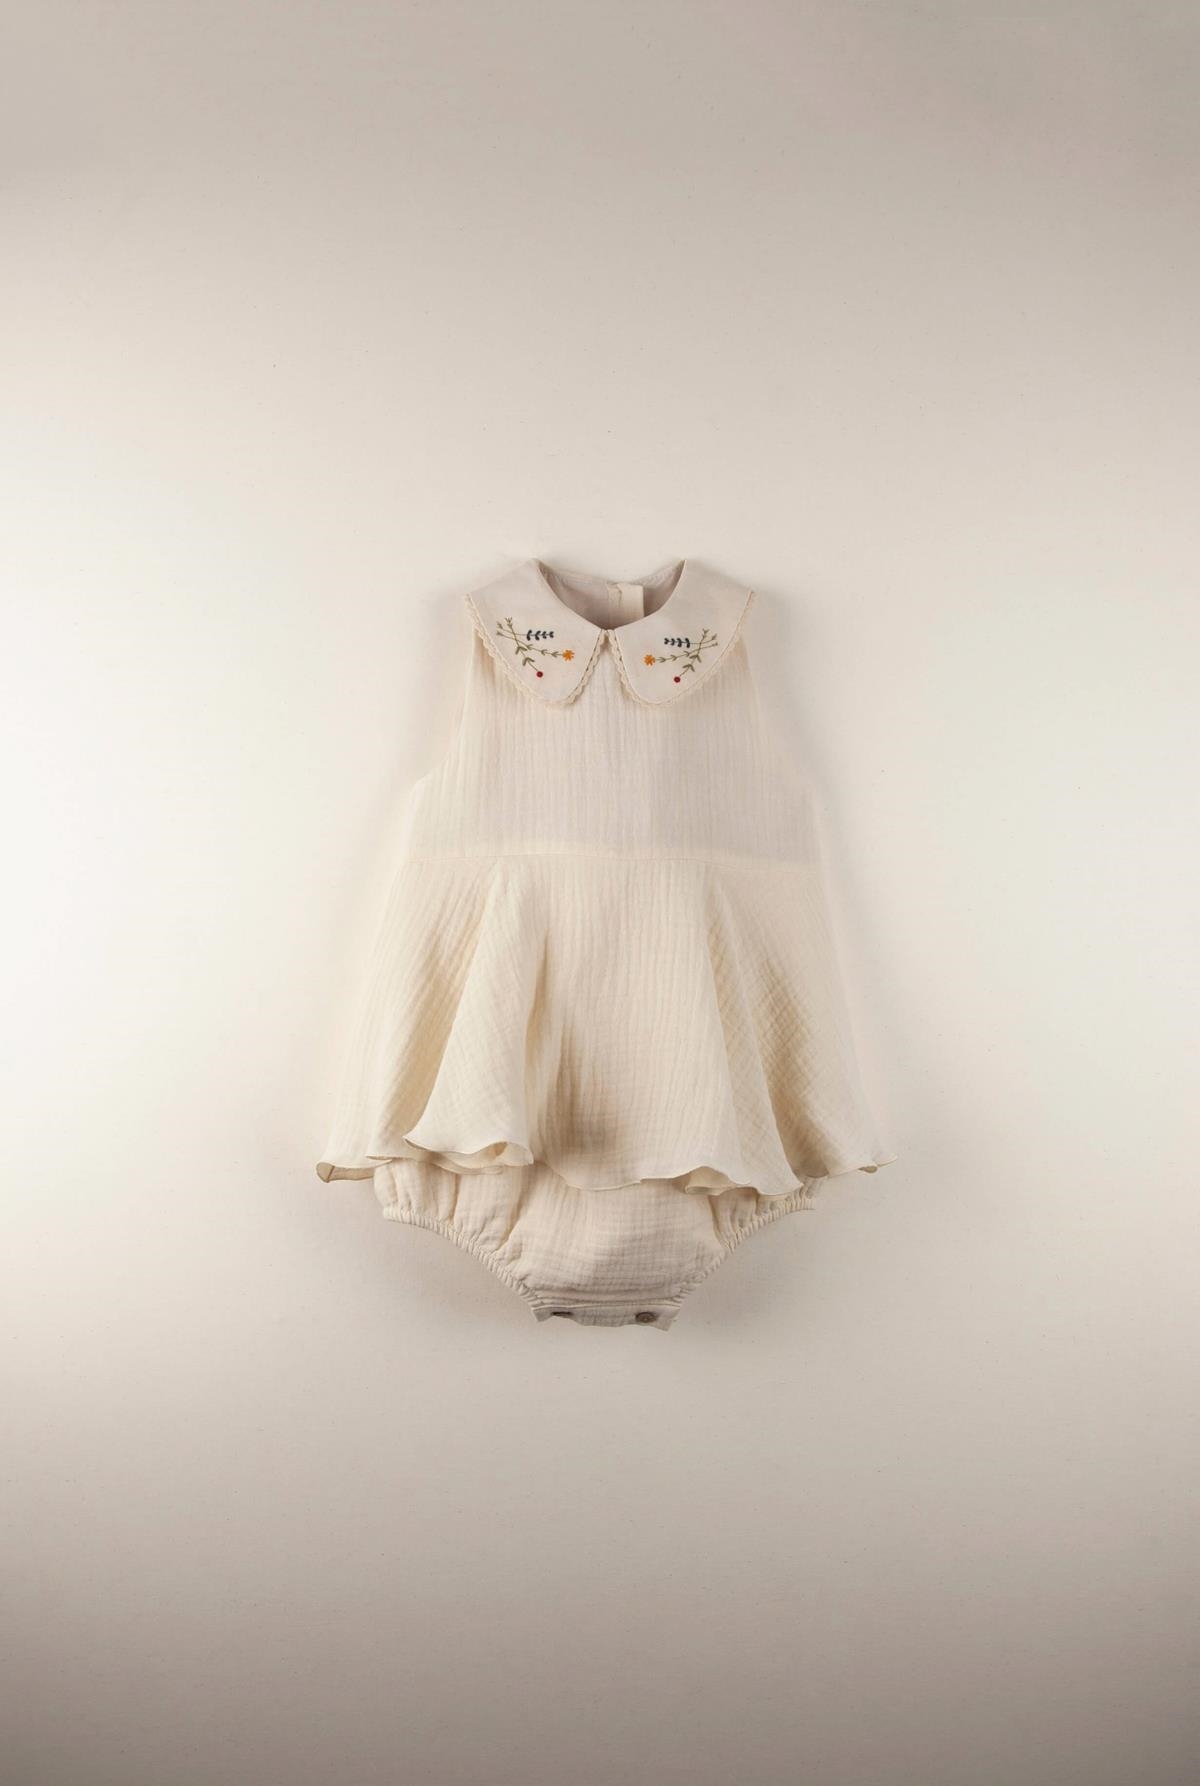 Mod.7.4 Off white romper suit with embroidered collar | SS22 Mod.7.4 Off white romper suit with embroidered collar | 1